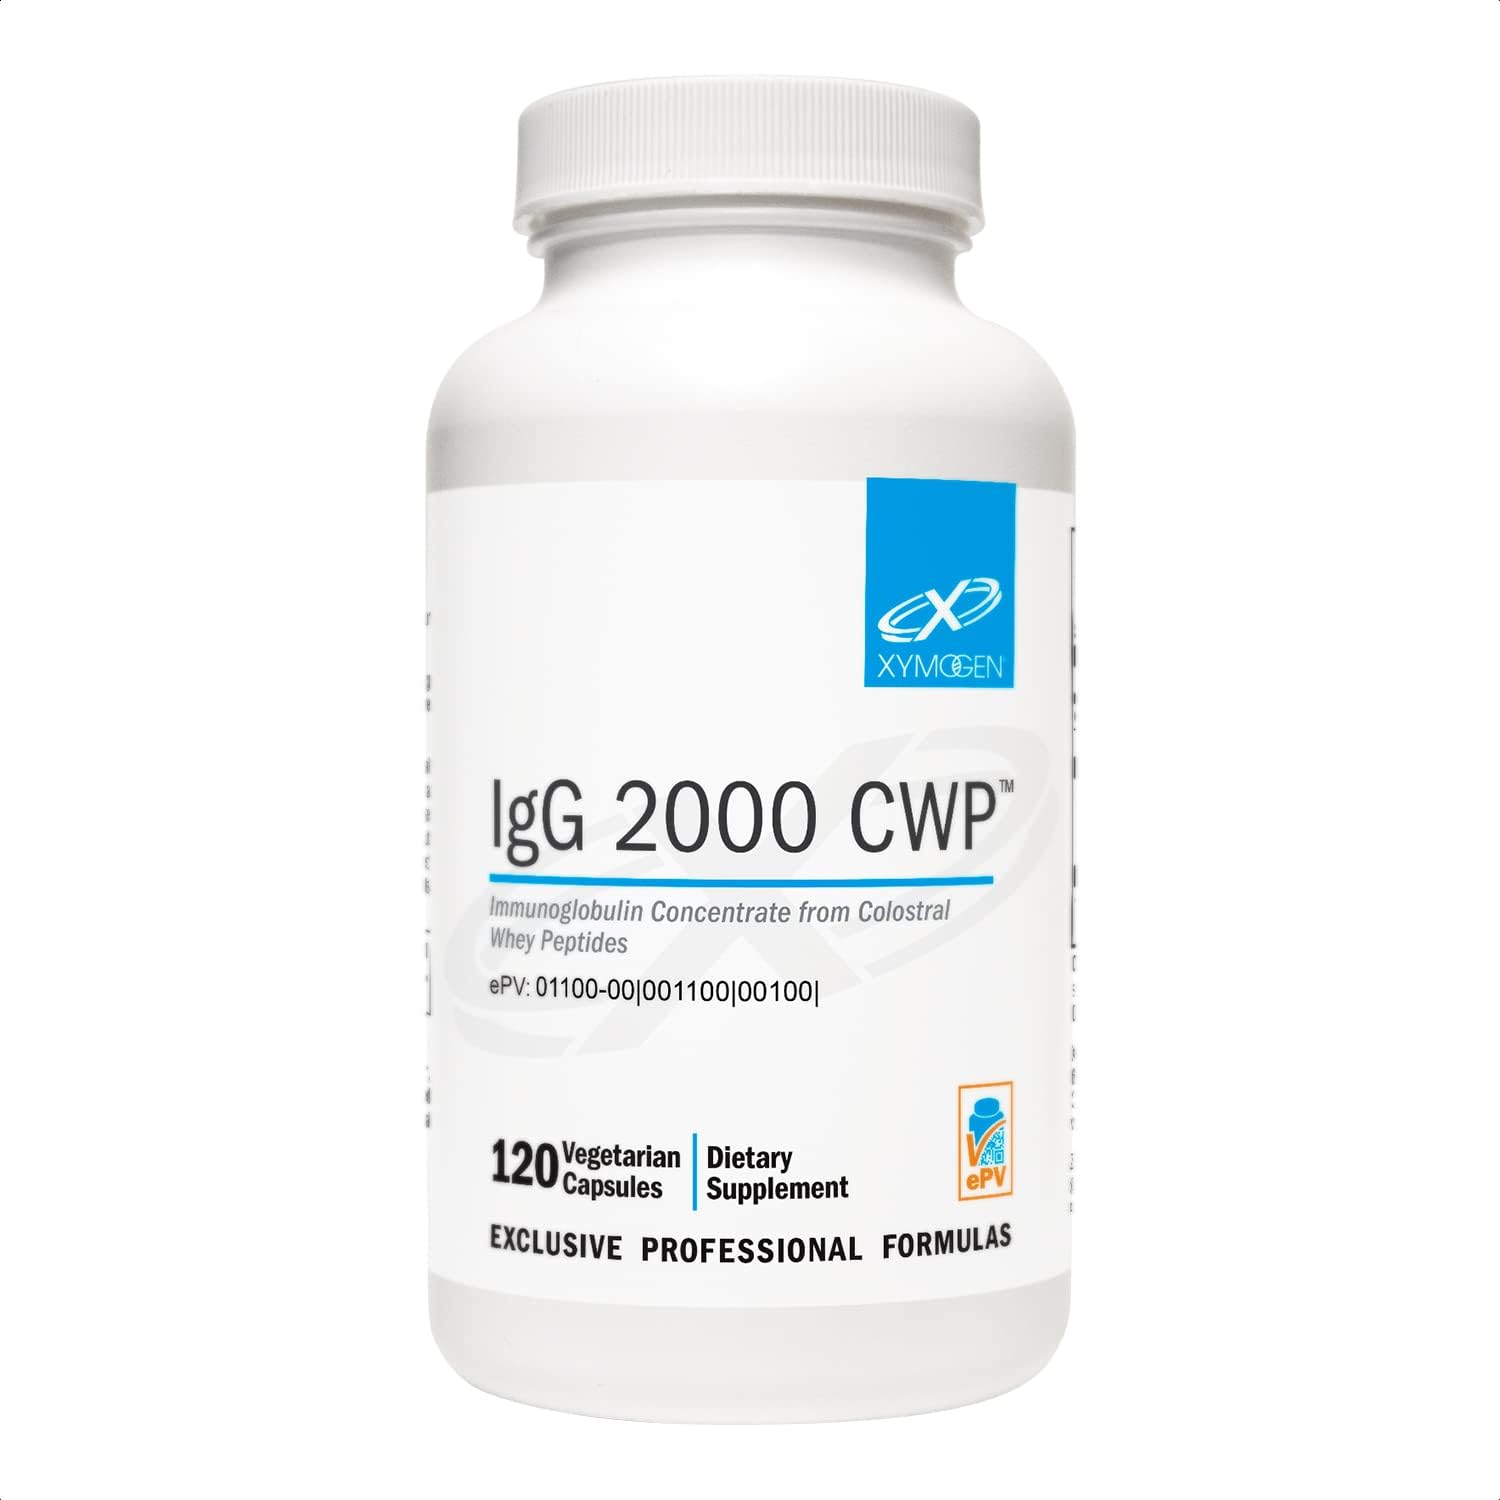 XYMOGEN IgG 2000 CWP - Immunoglobulin Concentrate (from Colostral Whey